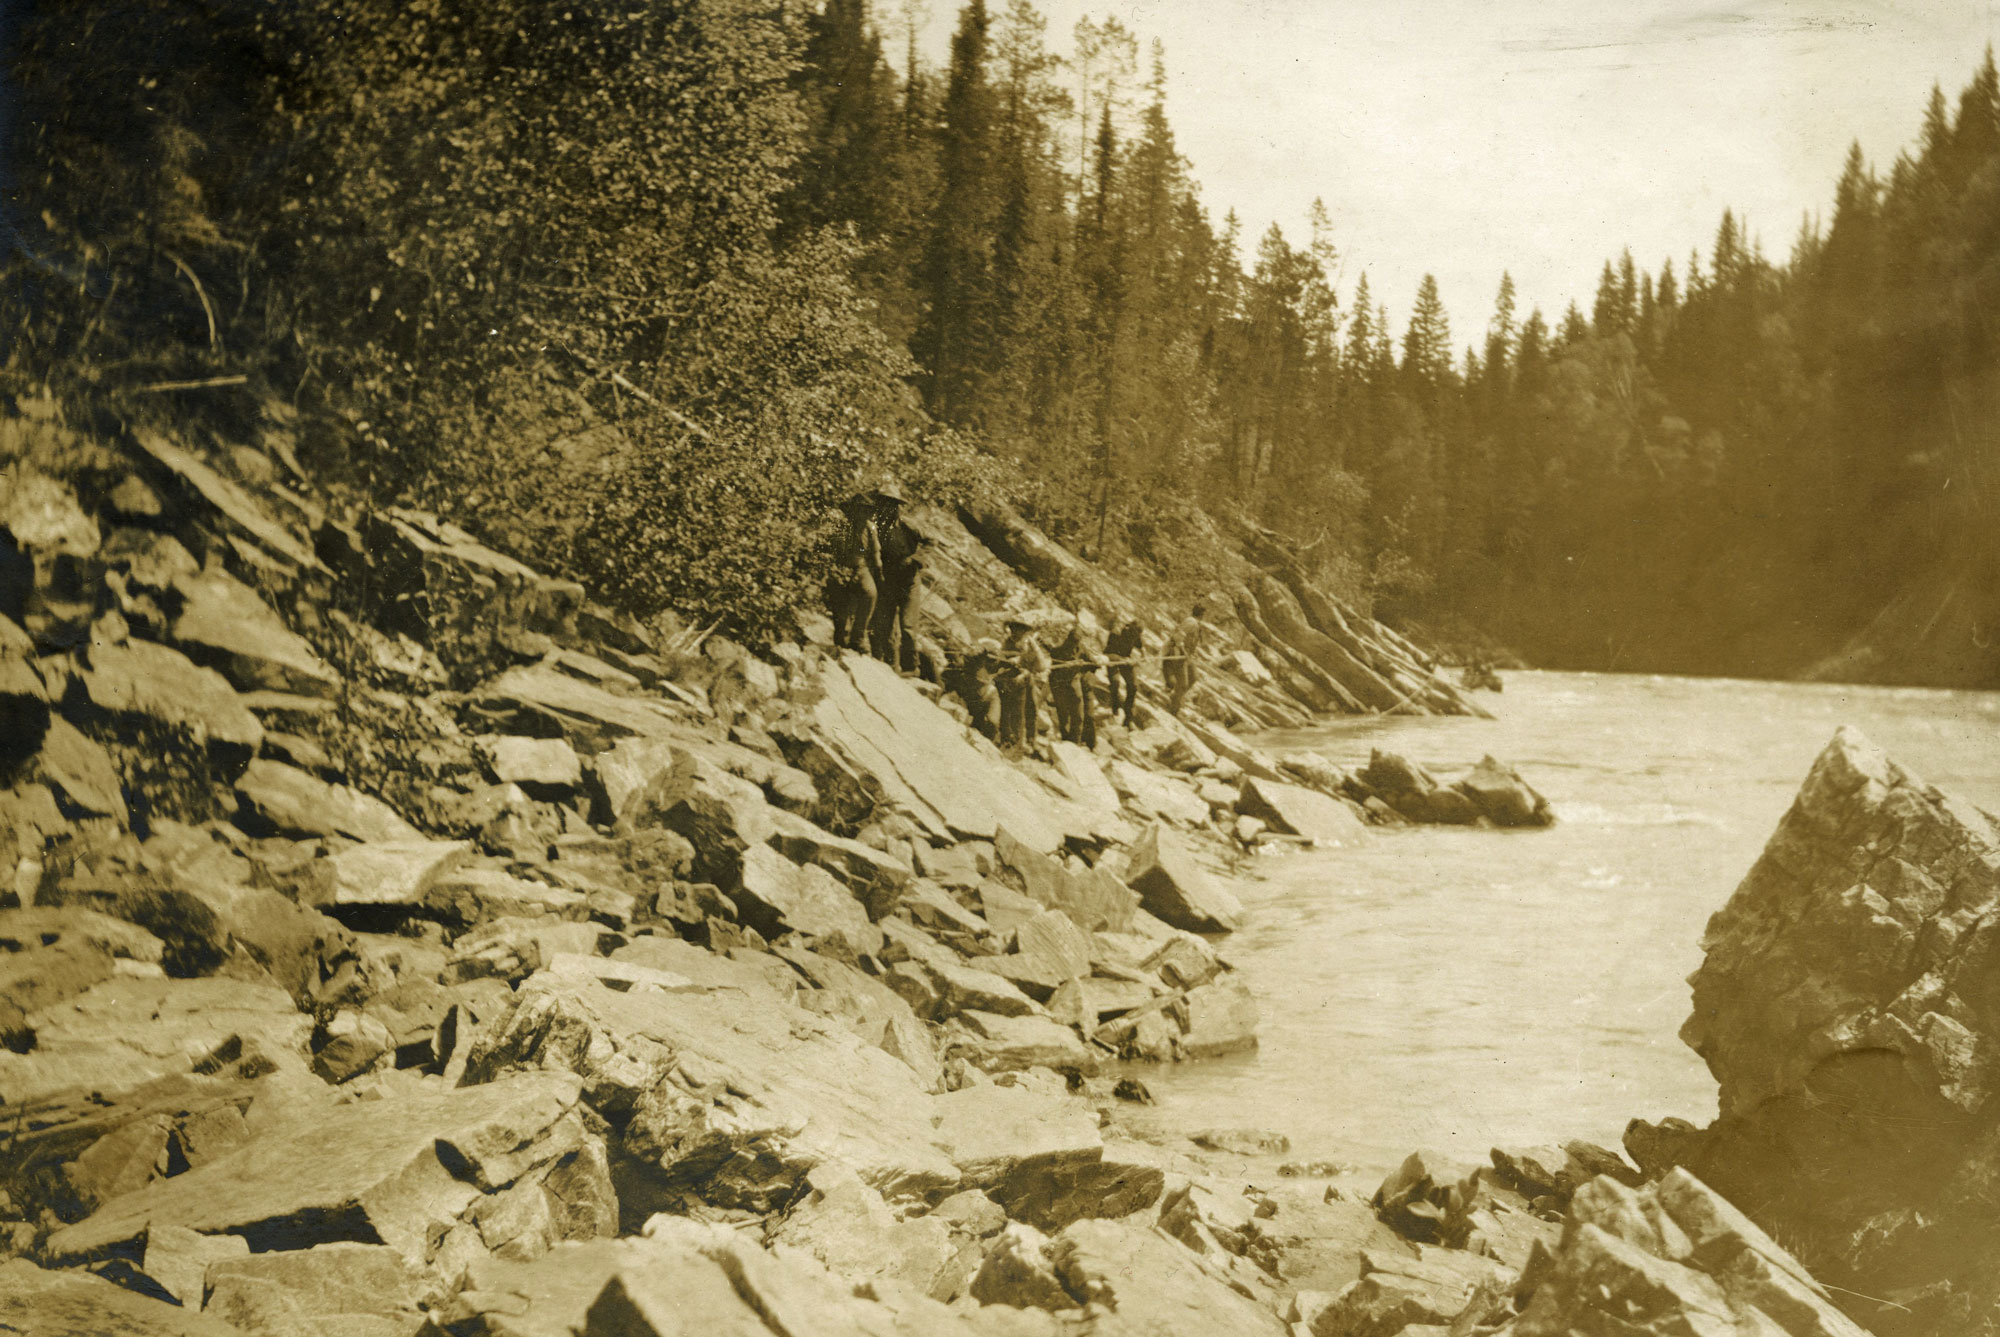 Grand Trunk Pacific survey supplies being freighted through the Grand Canyon of the Fraser River. Arthur H. Holland, 1907